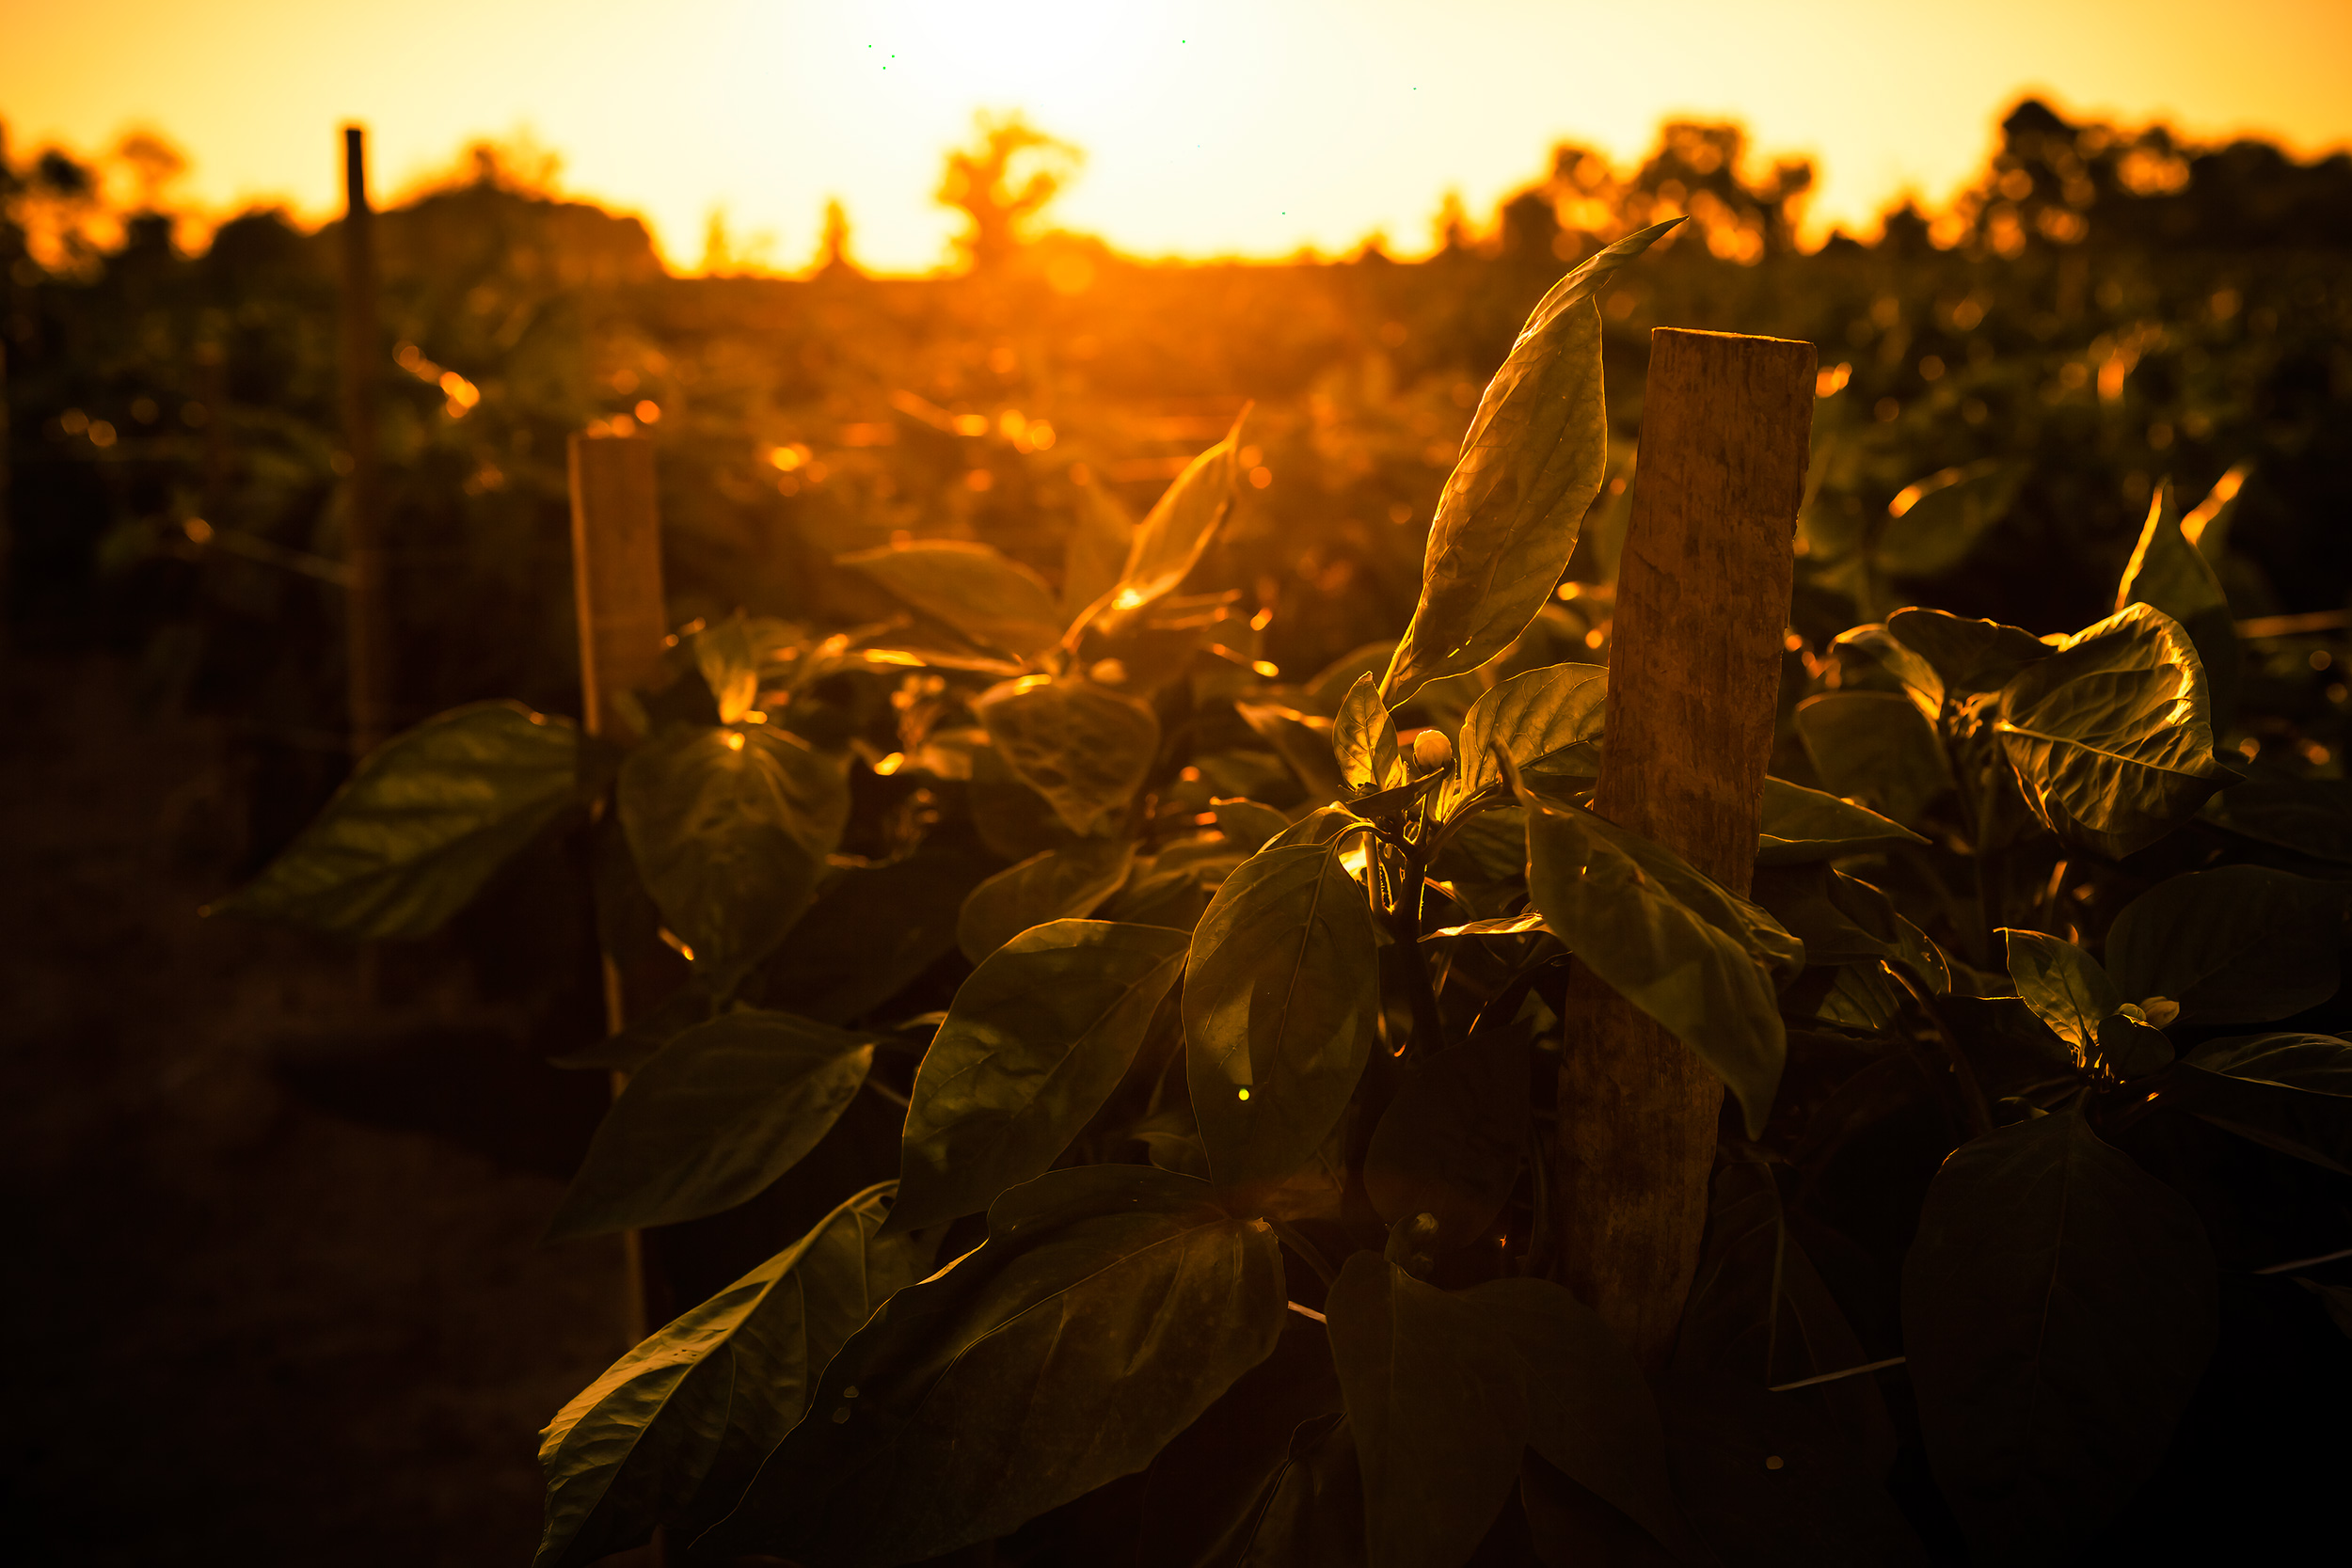 Agriculture Photography pepper plants in field at sunset close up